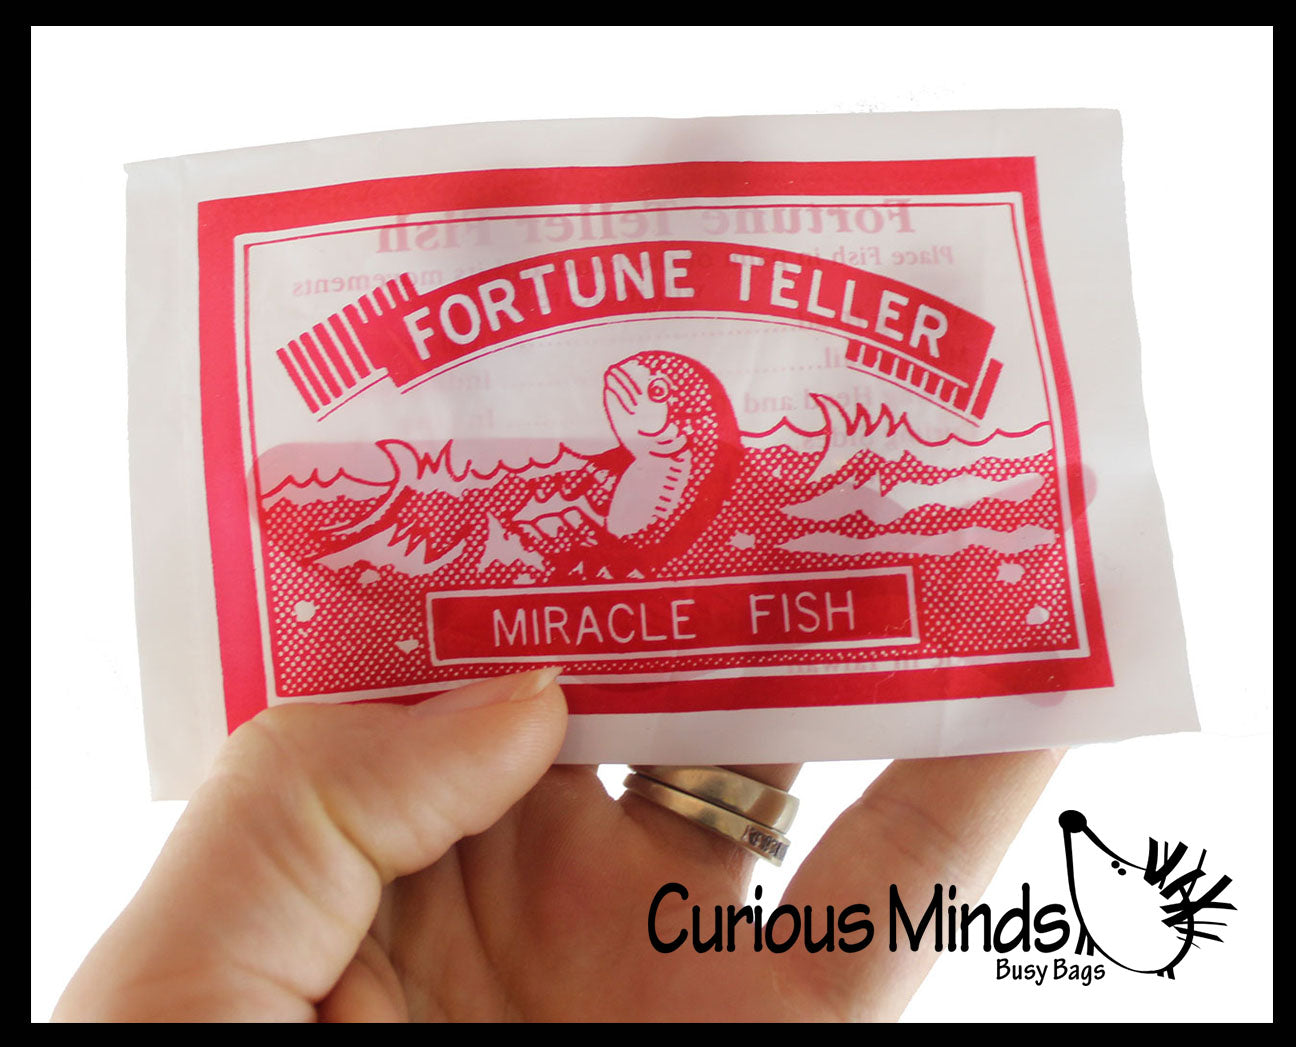 Fortune Magic Fish - Mood Ring Like Toy- Love Meter - Fortune Telling Toy - Classic Fun Predictor Toy